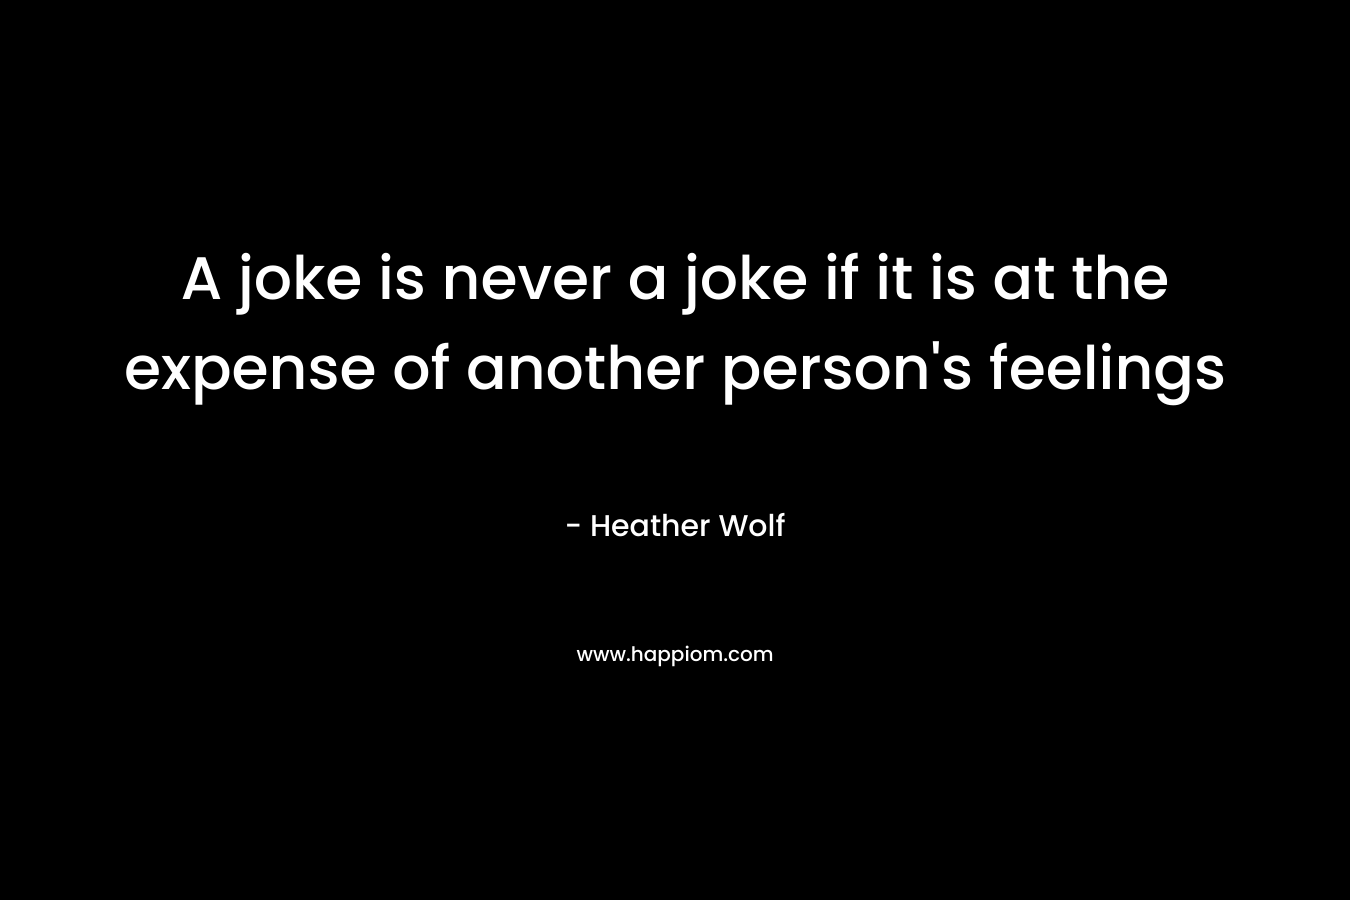 A joke is never a joke if it is at the expense of another person’s feelings – Heather Wolf